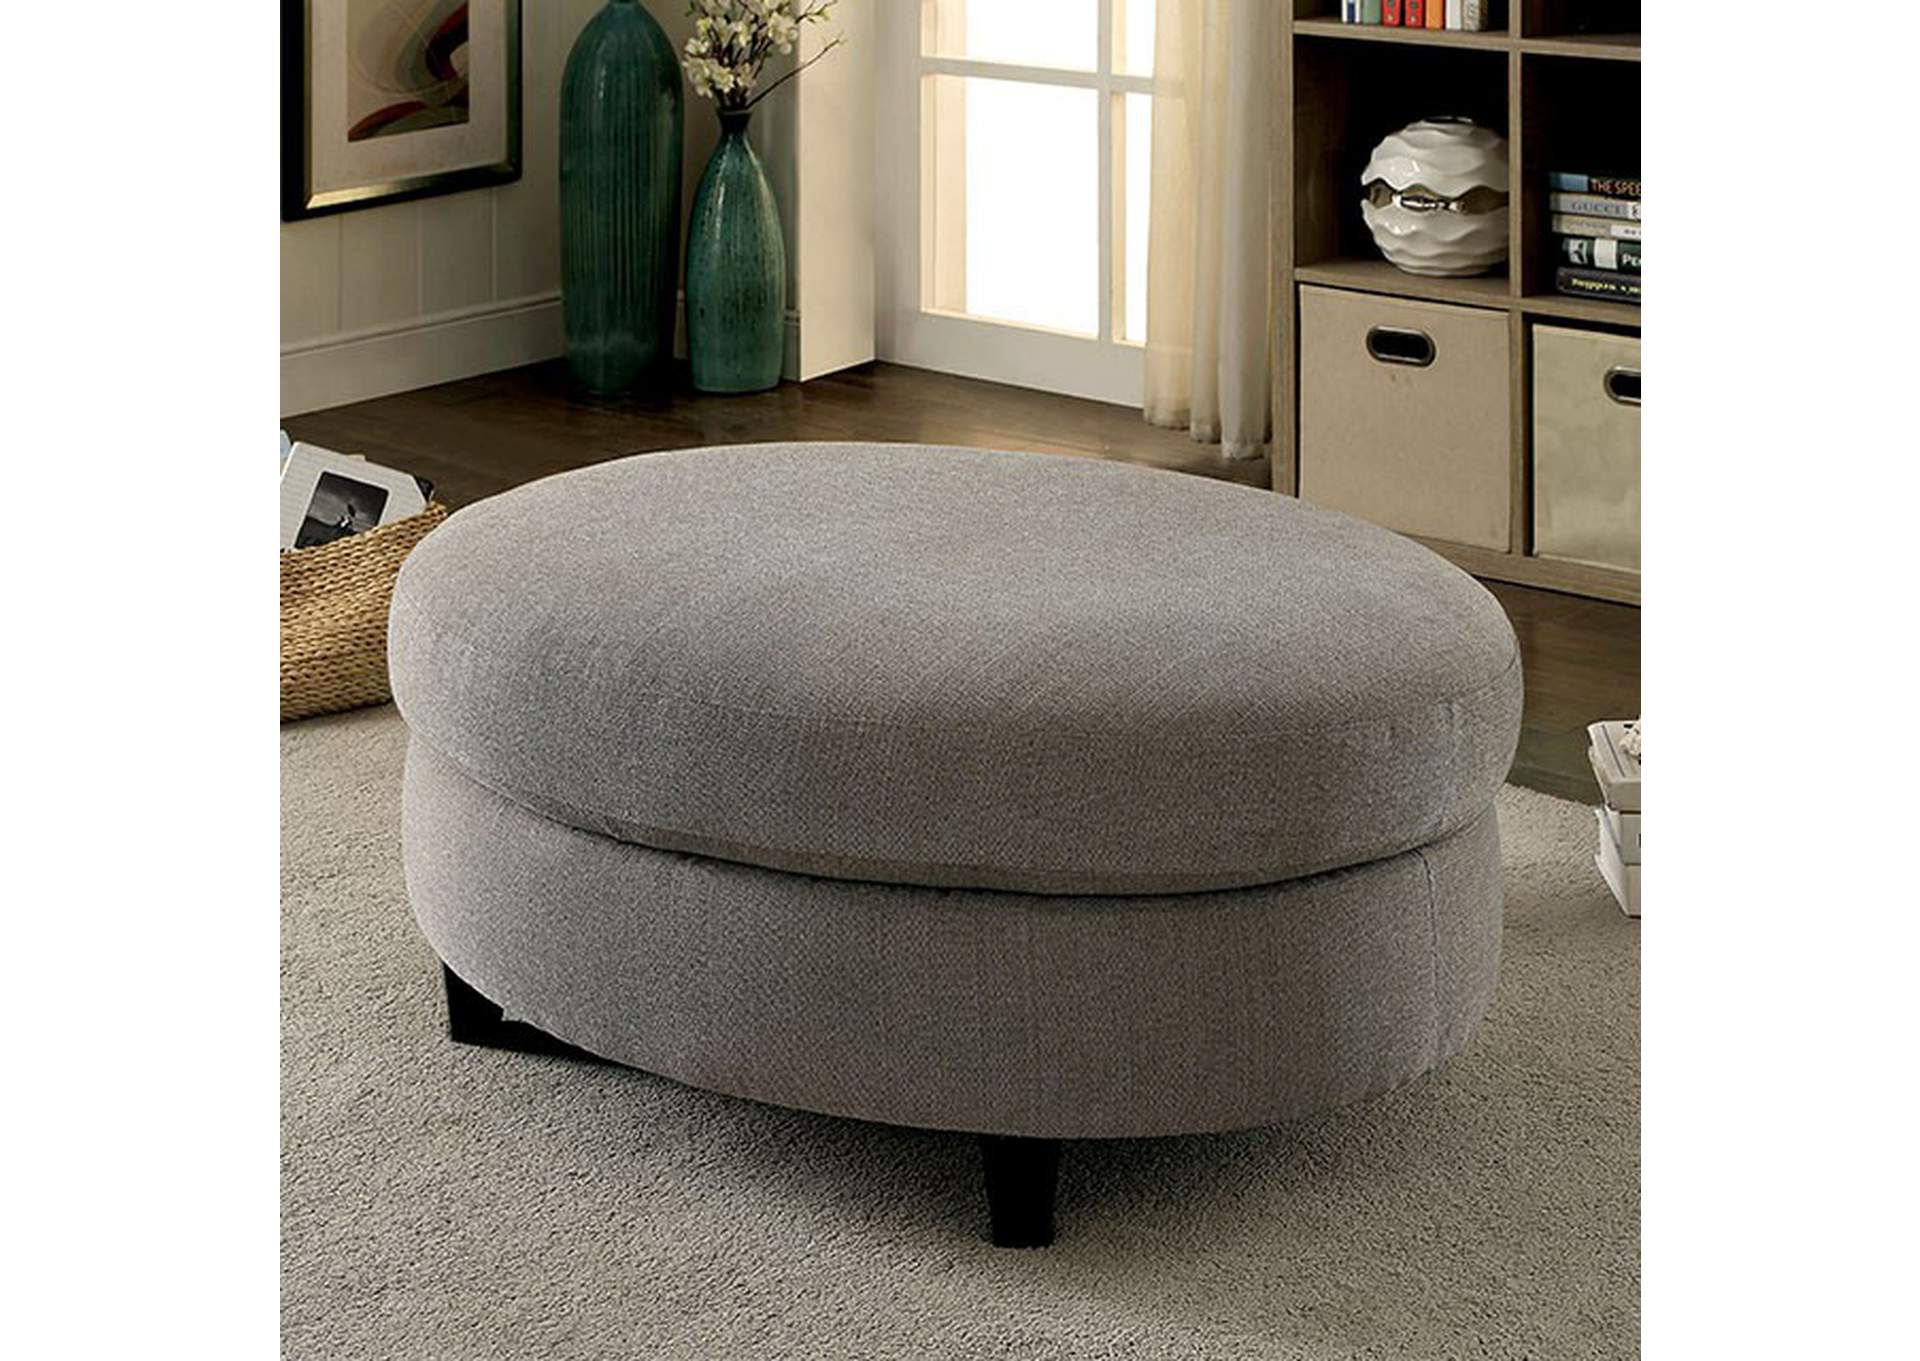 Sarin Warm Gray Sectional,Furniture of America